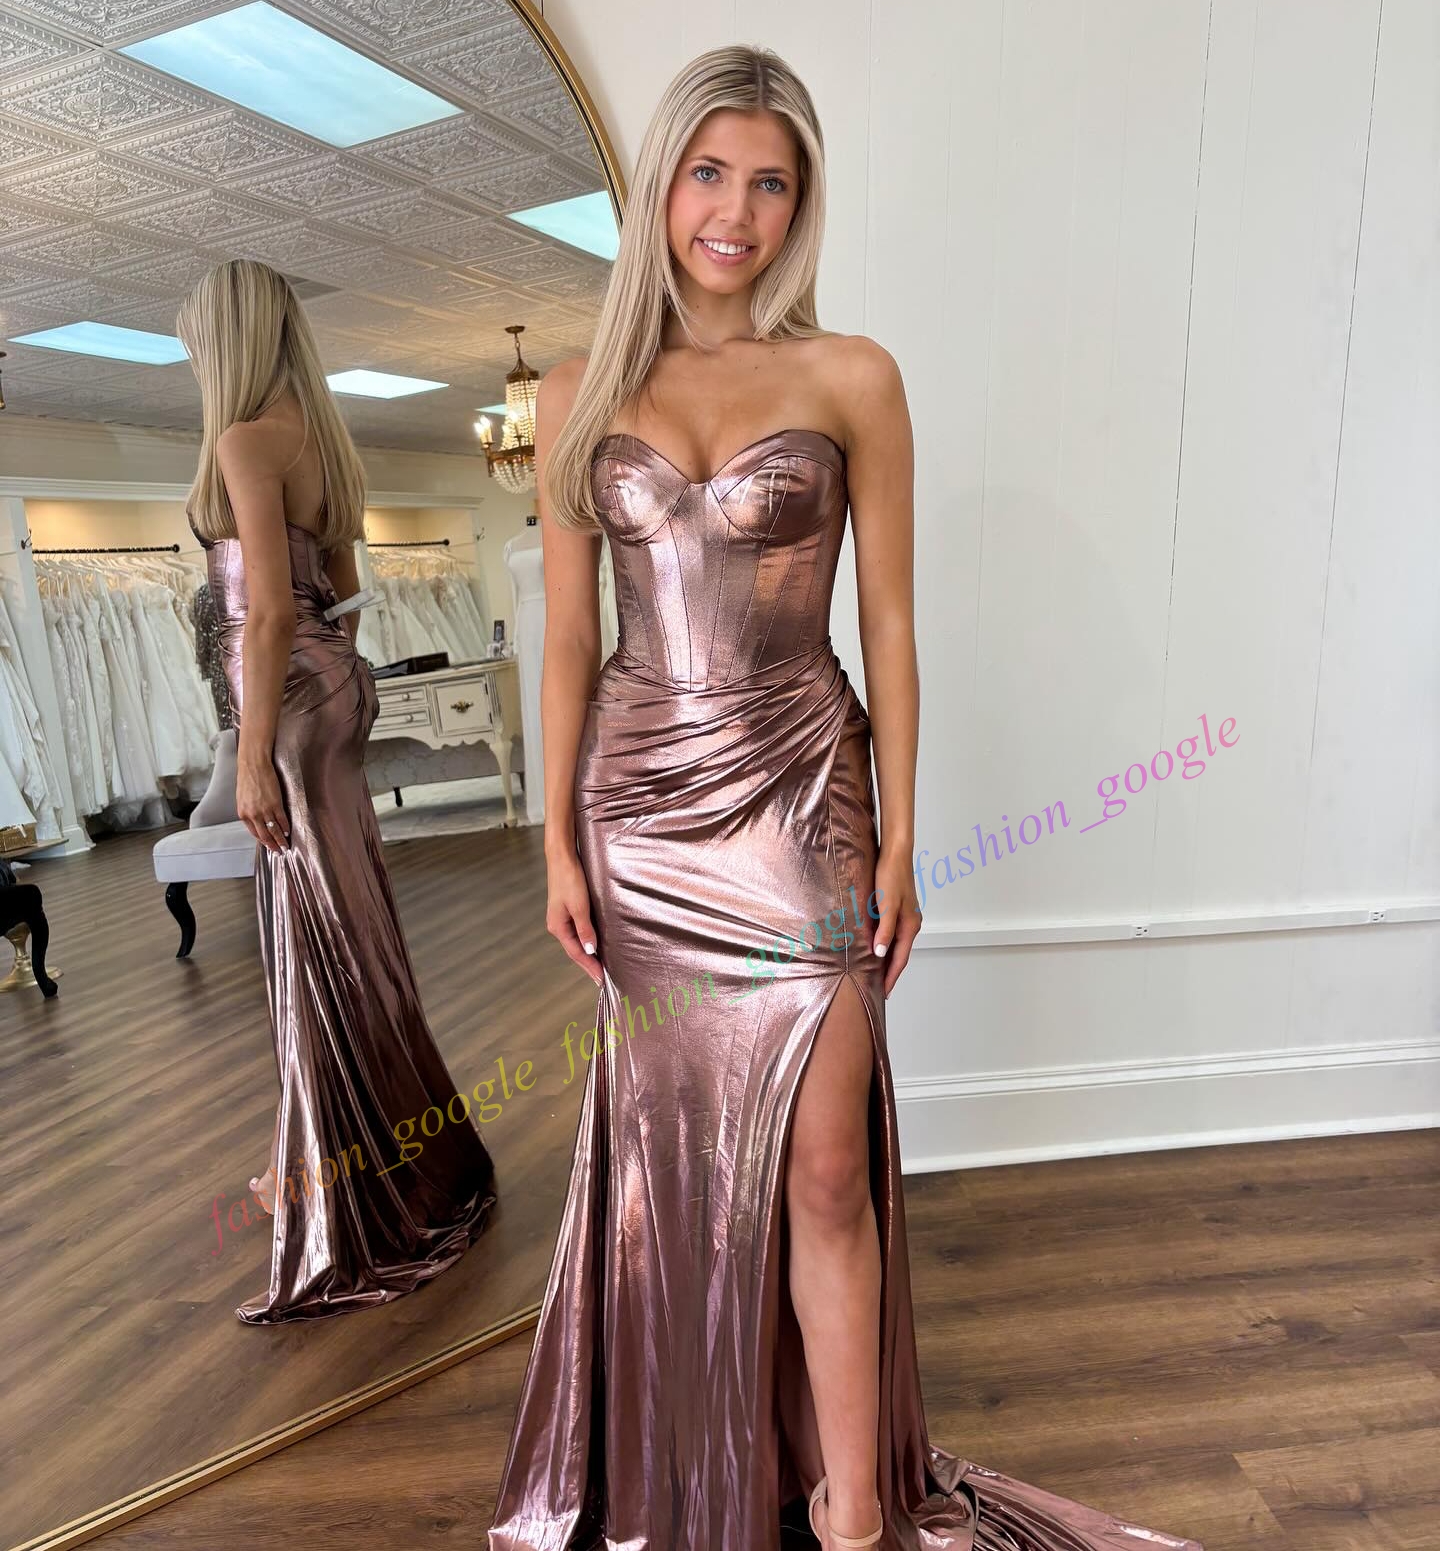 Strapless Corset Metallic Prom Dress Ruched High Leg Slit Long Winter Formal Event Party Gown Red Carpet Runway Oscar Gala Pageant Magenta Rose Gold Royal Ocean Blue